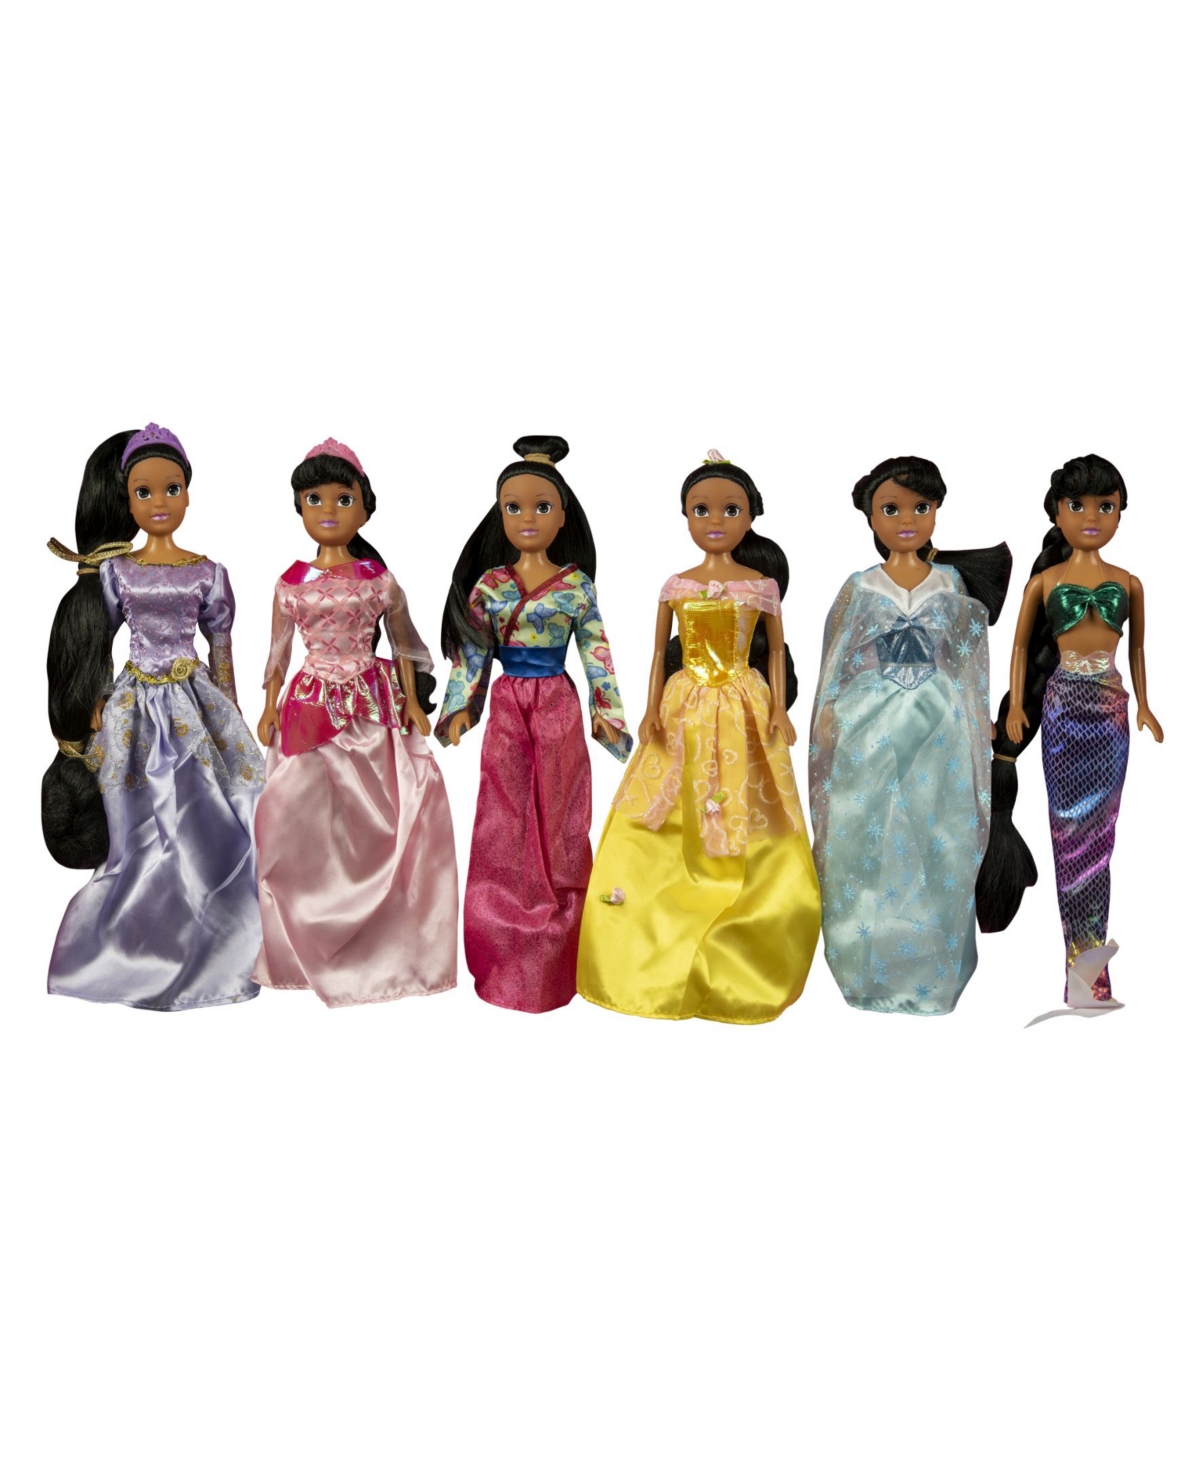 Playtime Toys Kids' Smart Talent 11.5" African American Princess Dolls Gift Set In Multi